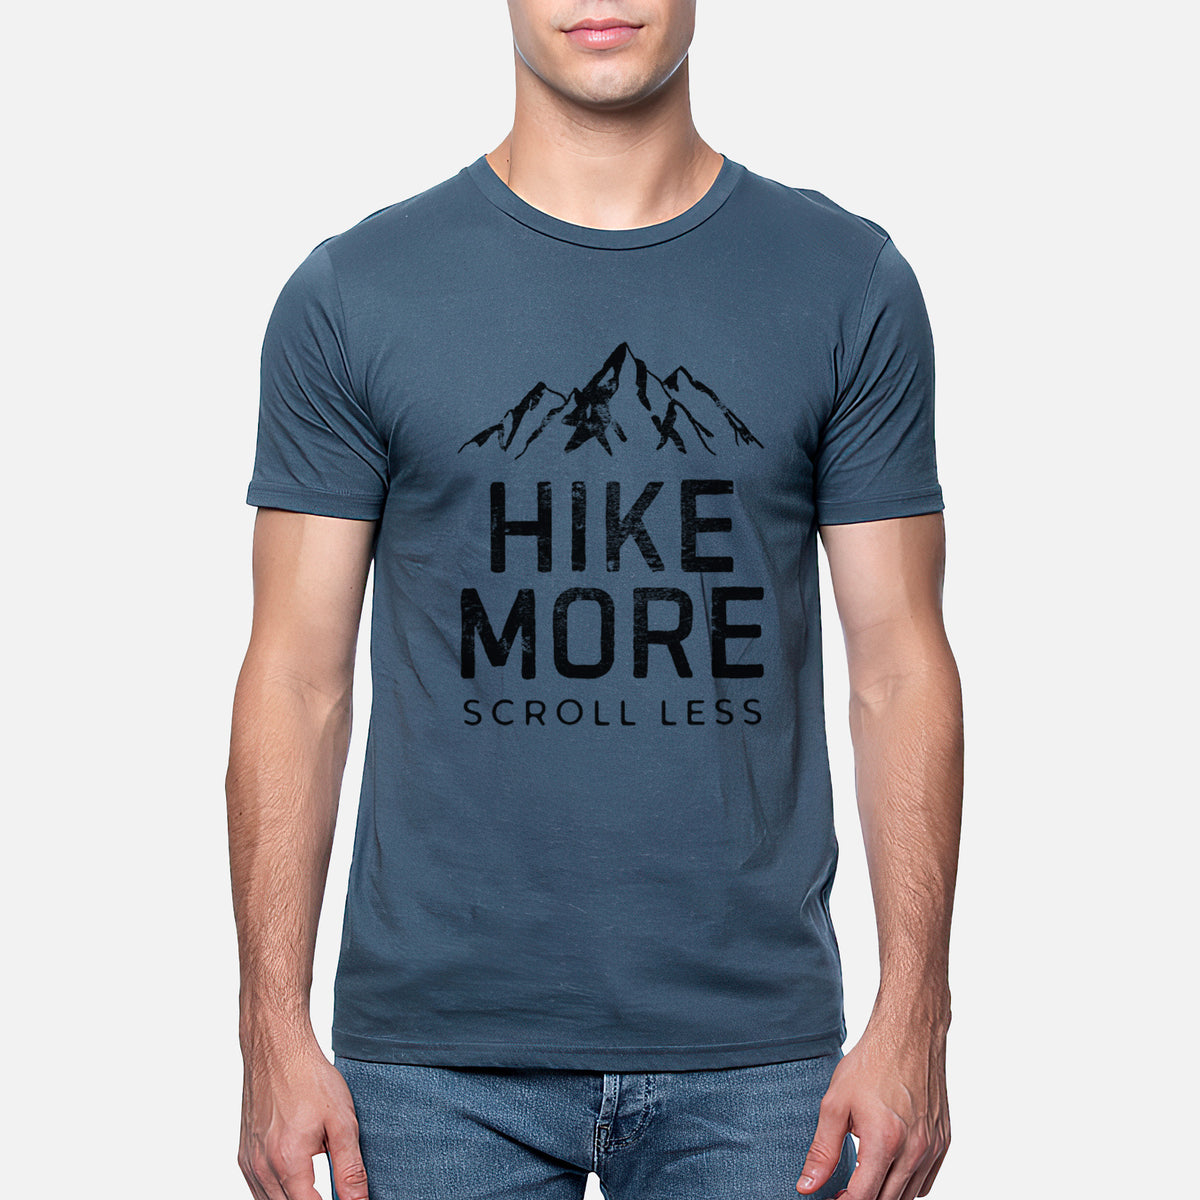 Hike More - Scroll Less - Unisex Crewneck - Made in USA - 100% Organic Cotton